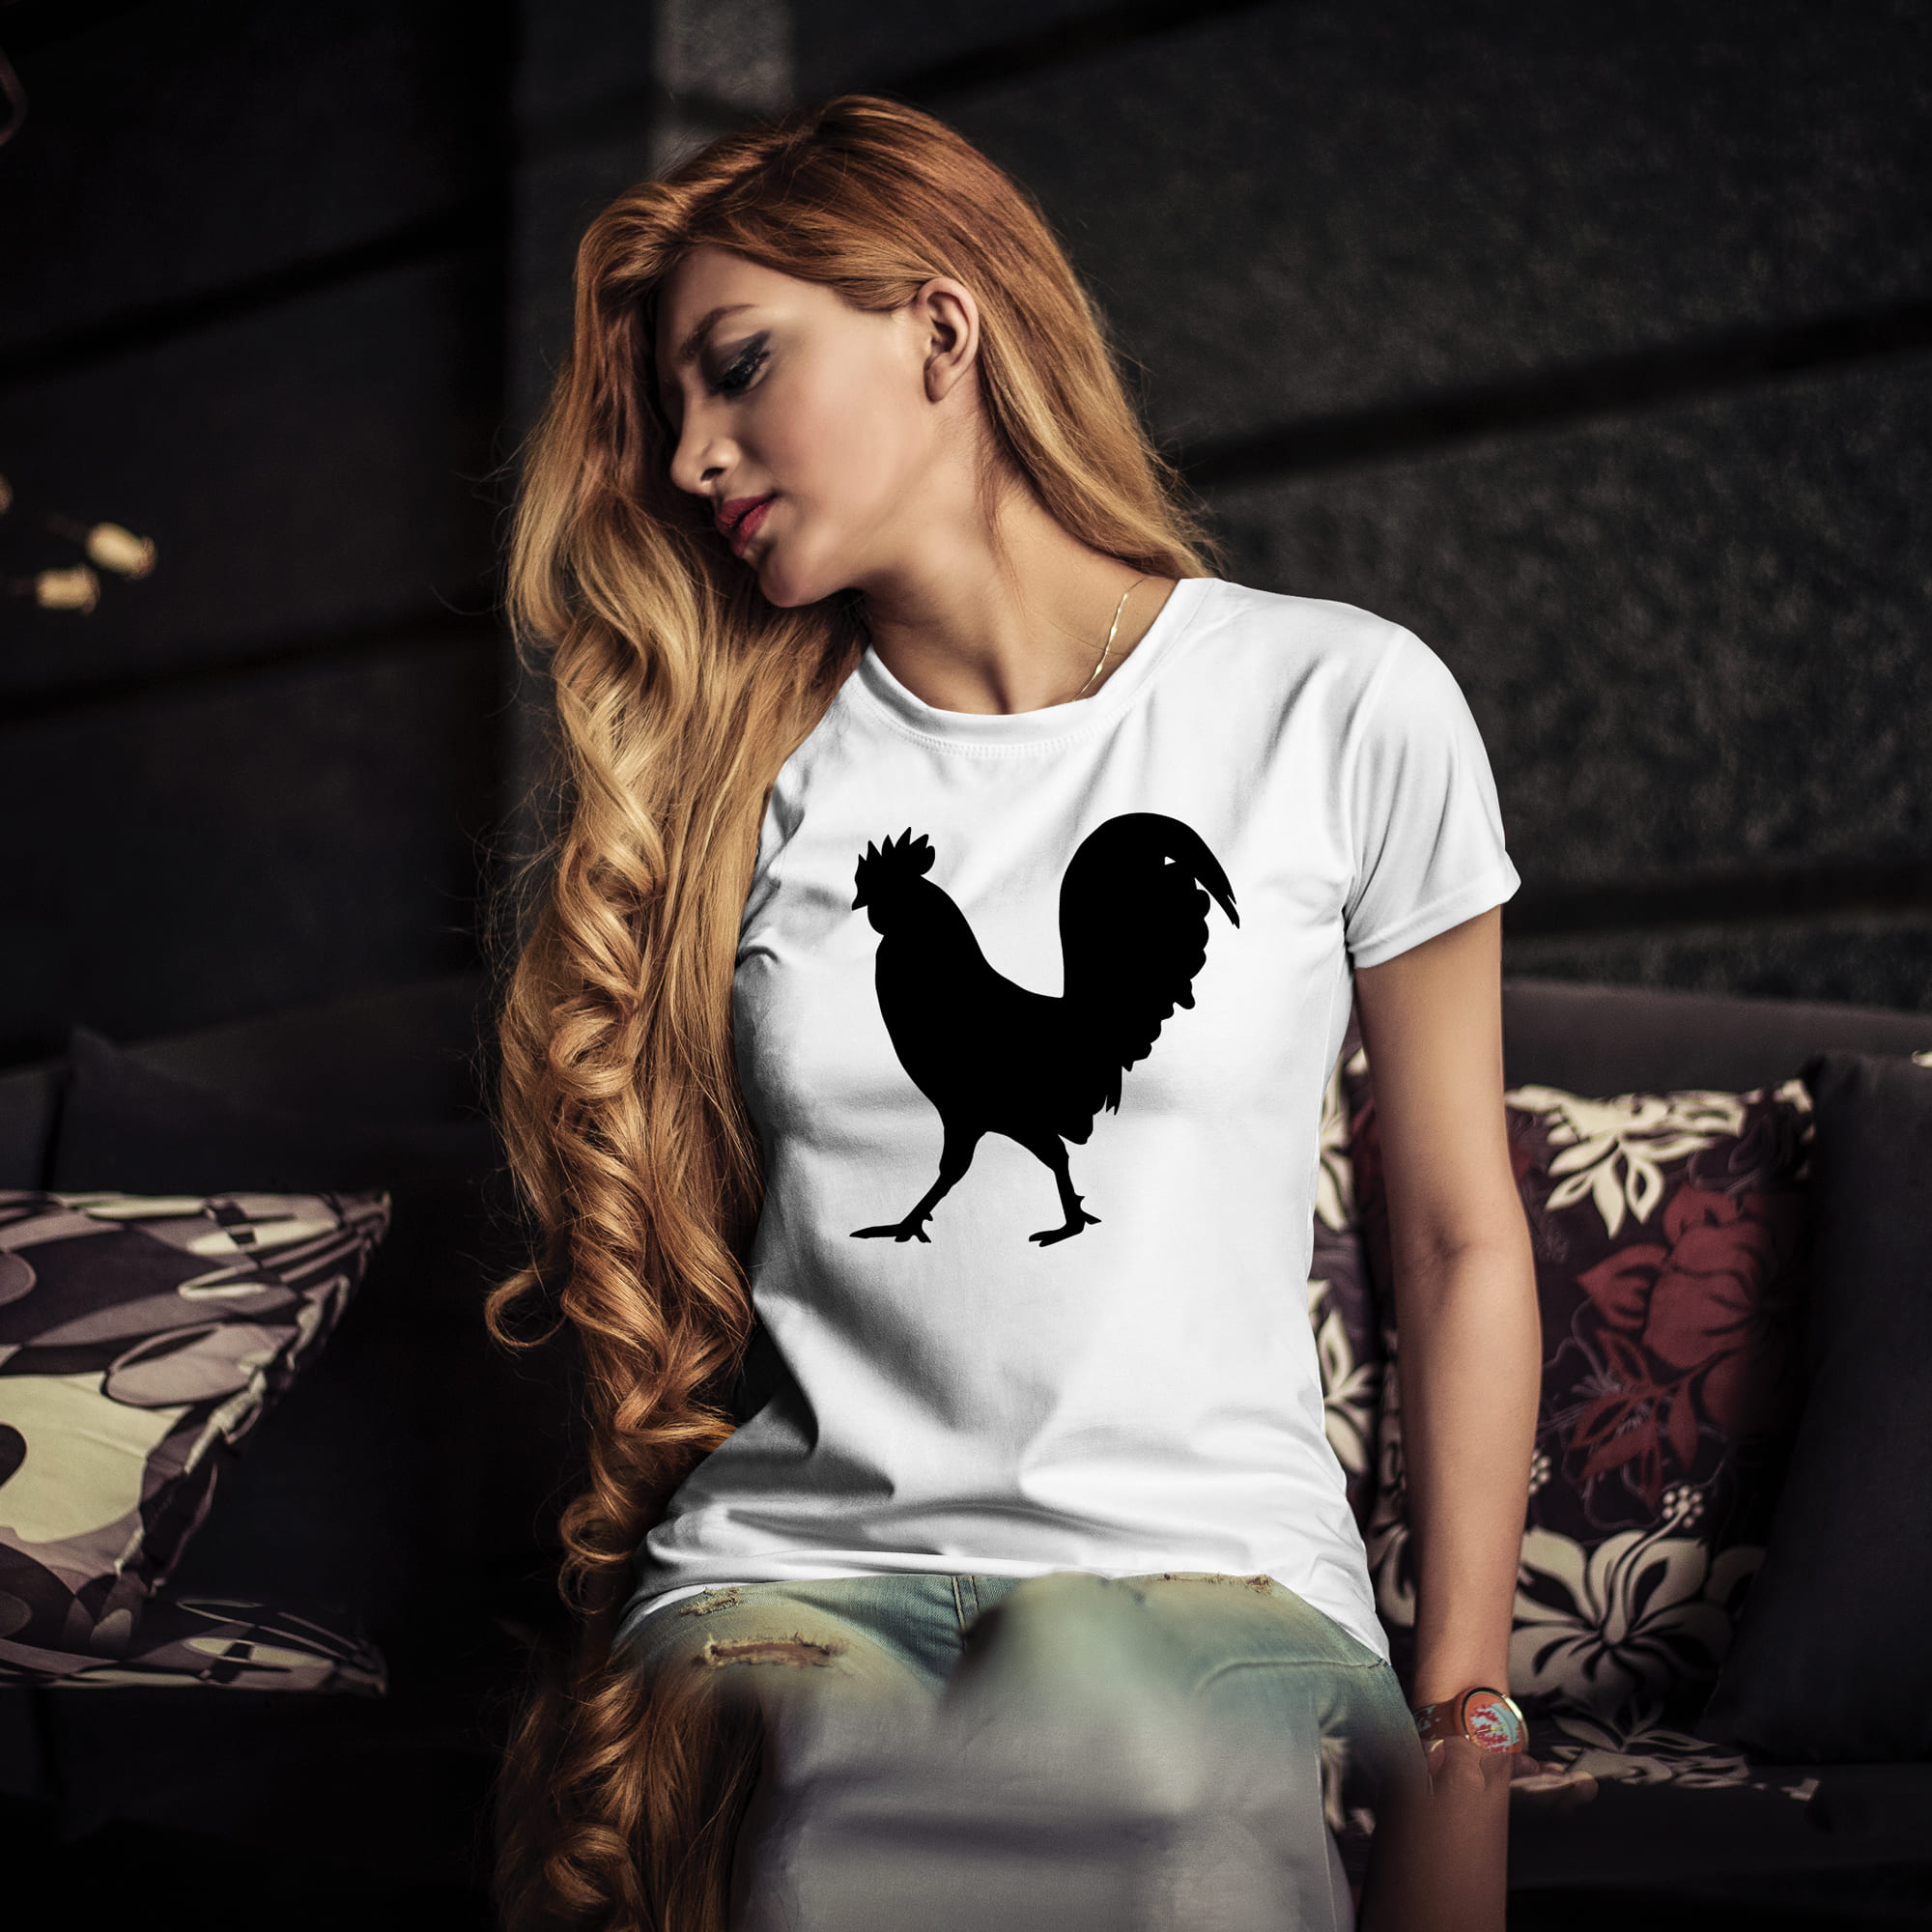 Woman sitting on a couch wearing a t - shirt with a rooster on it.